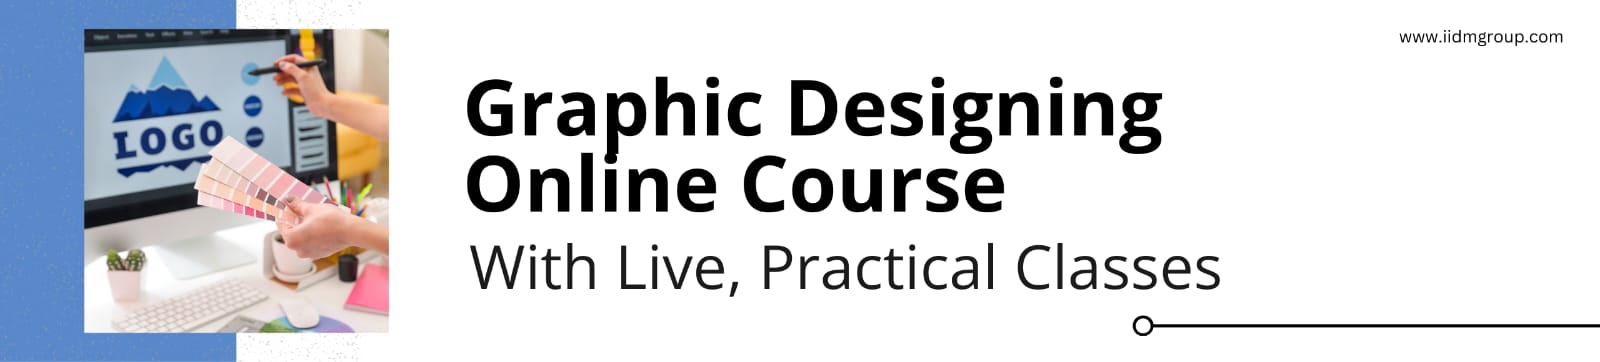 Graphic Designing Online Course With Live, Practical Classes